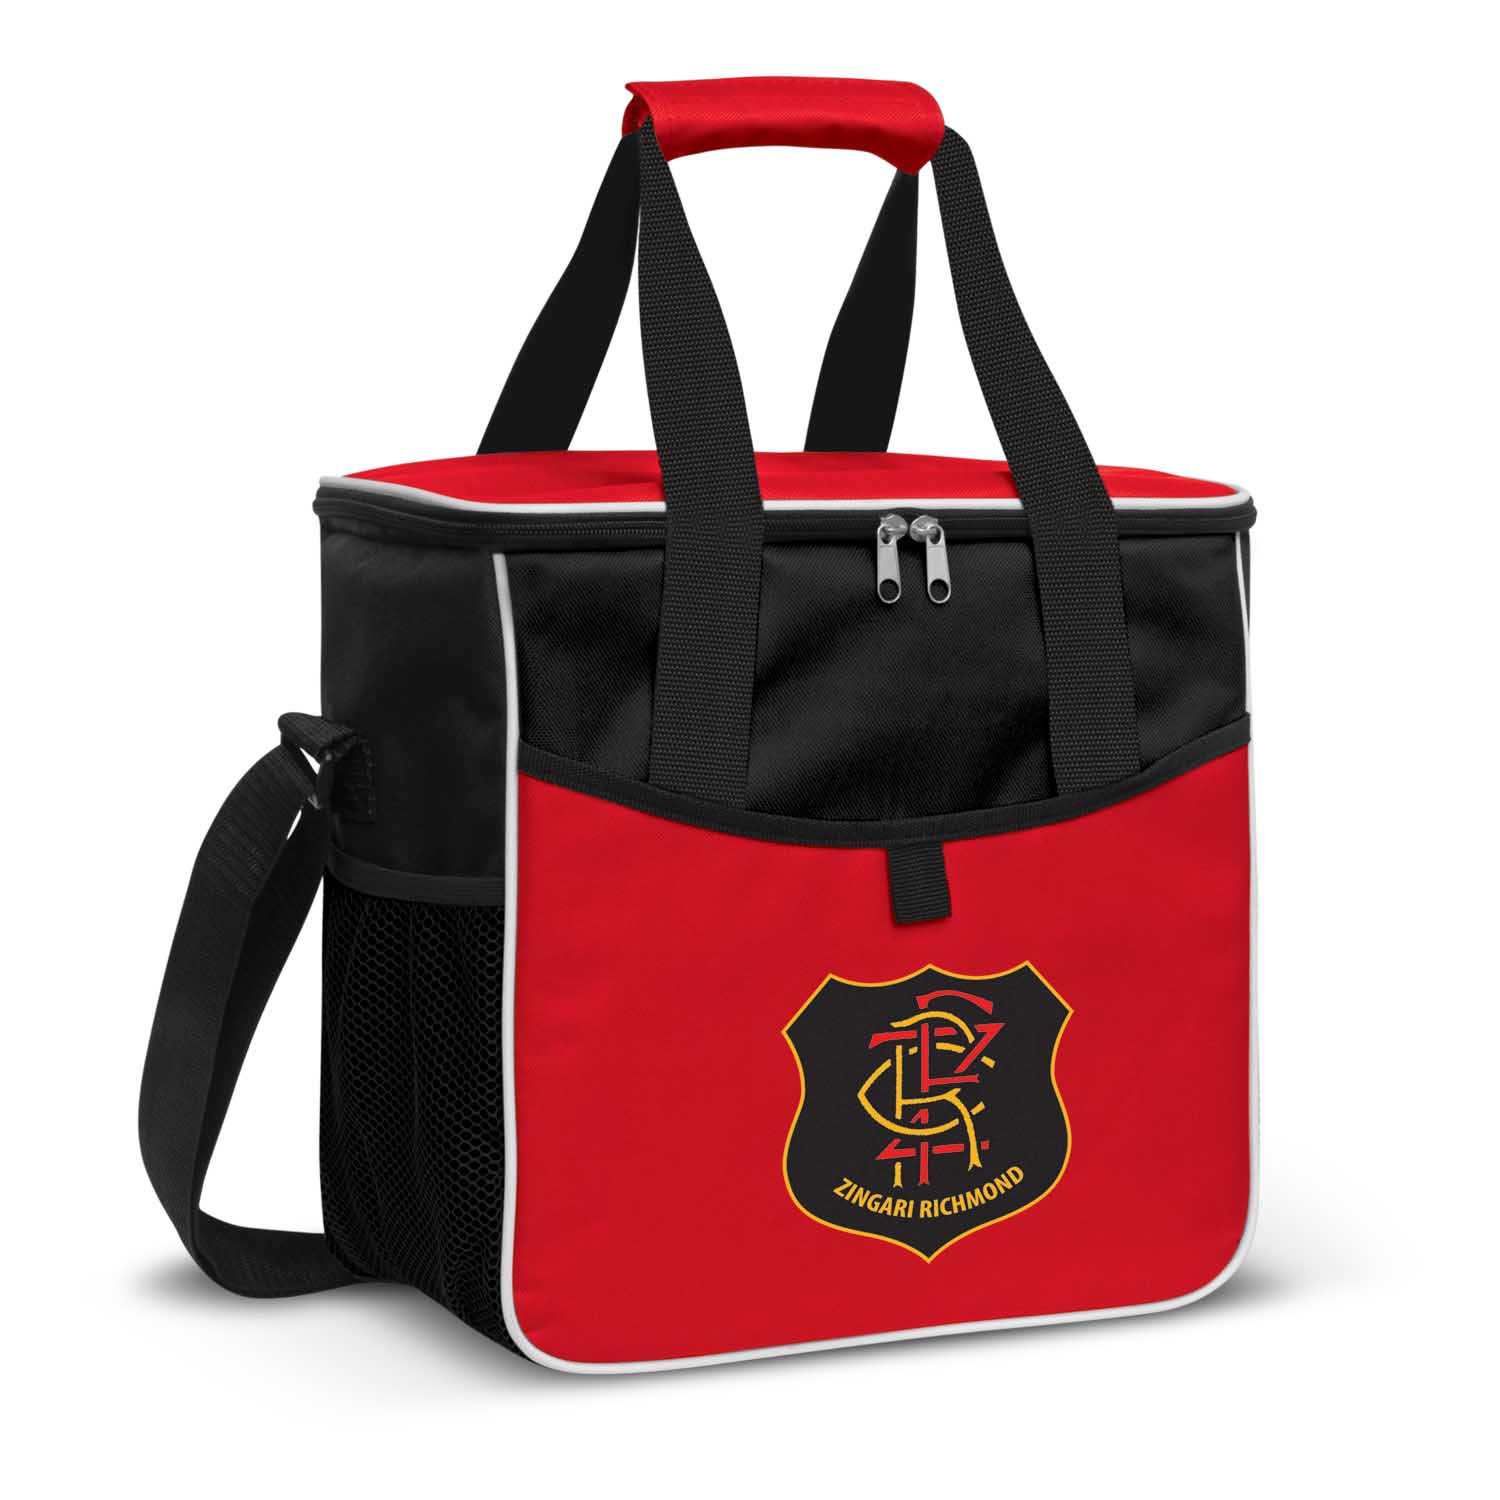 Get Red Nordic Cooler Bags Online in Perth